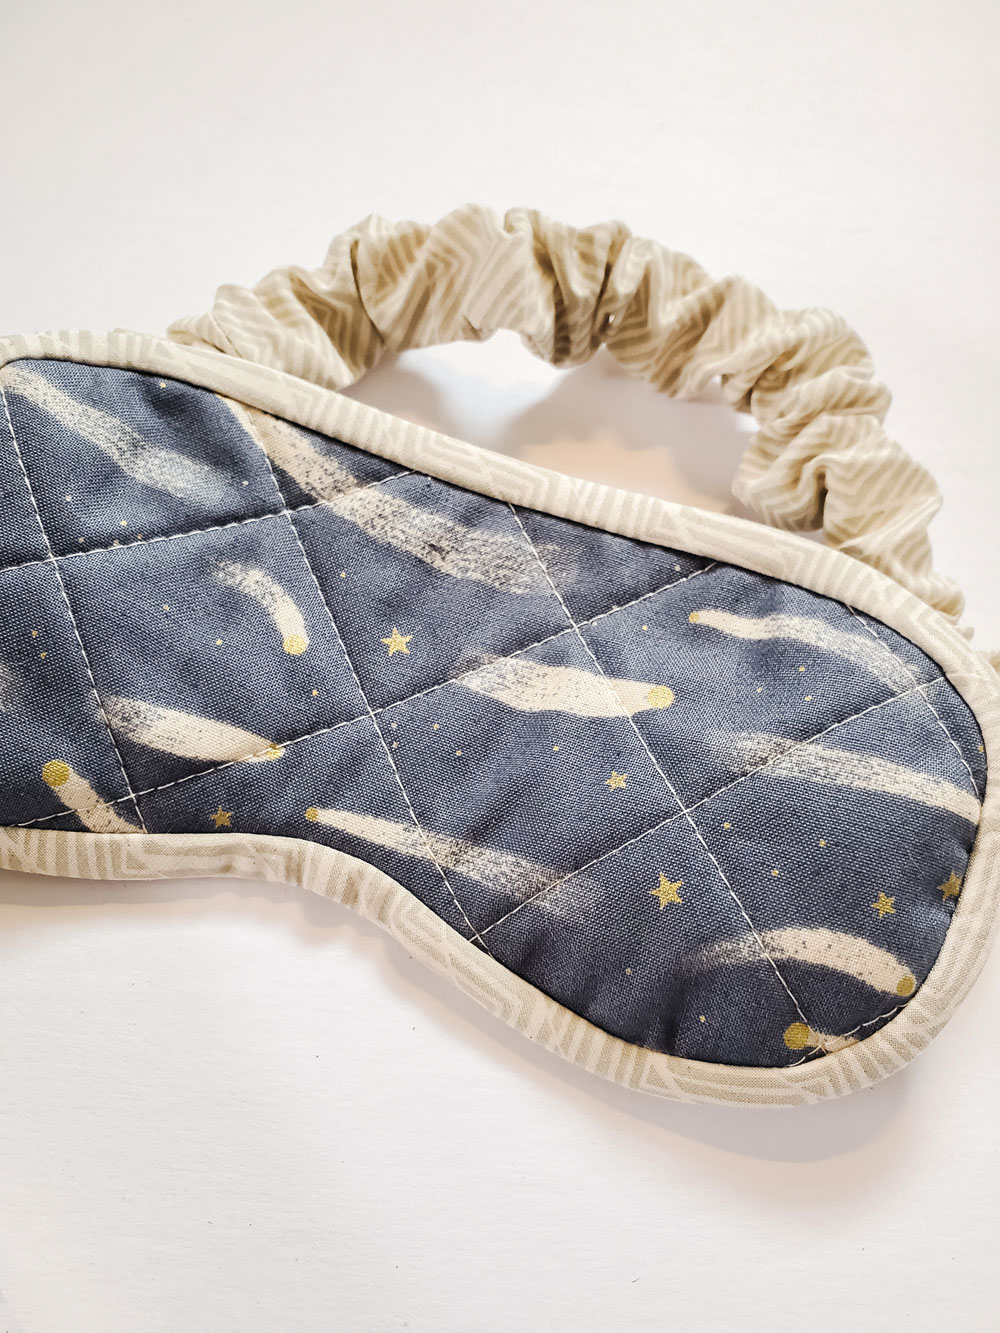 Use your scrap fabric to make this free quilted sleep mask! Step by step instructions for a beginner-friendly tutorial. | suzyquilts.com #sewingtutorial #DIYsewing